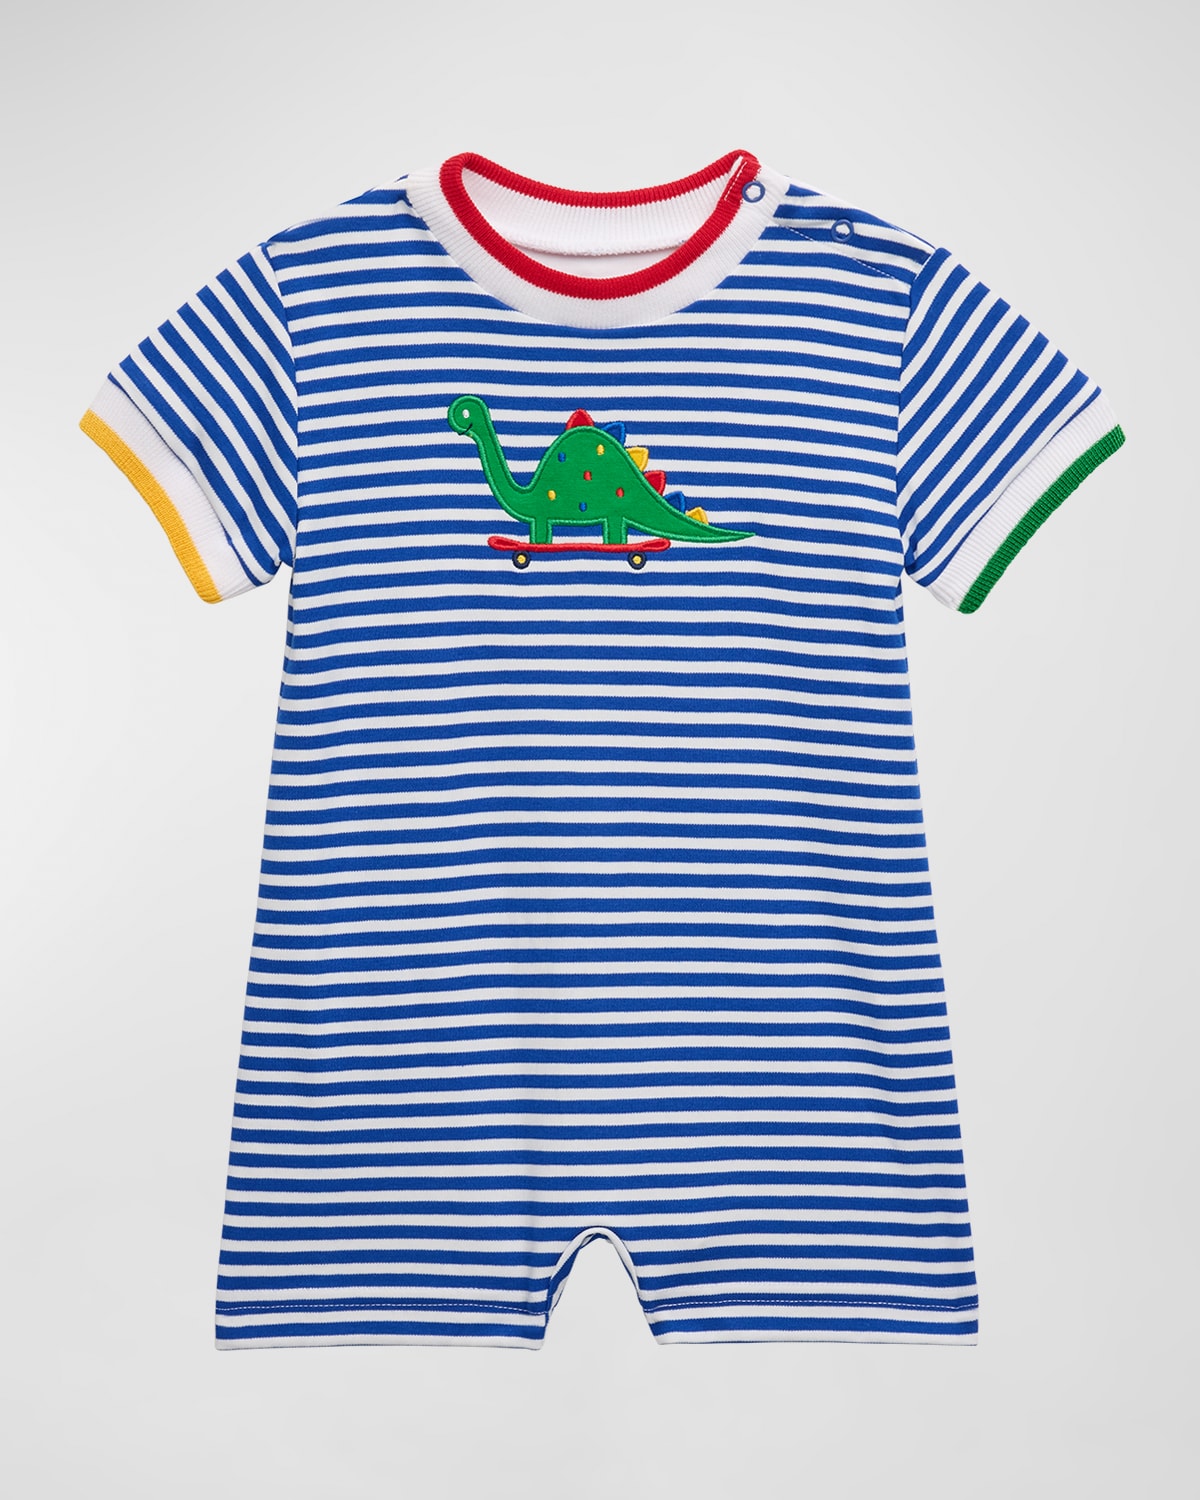 Boy's Dino Embroidered Stripe Knit Shortall, Size 3M-24M